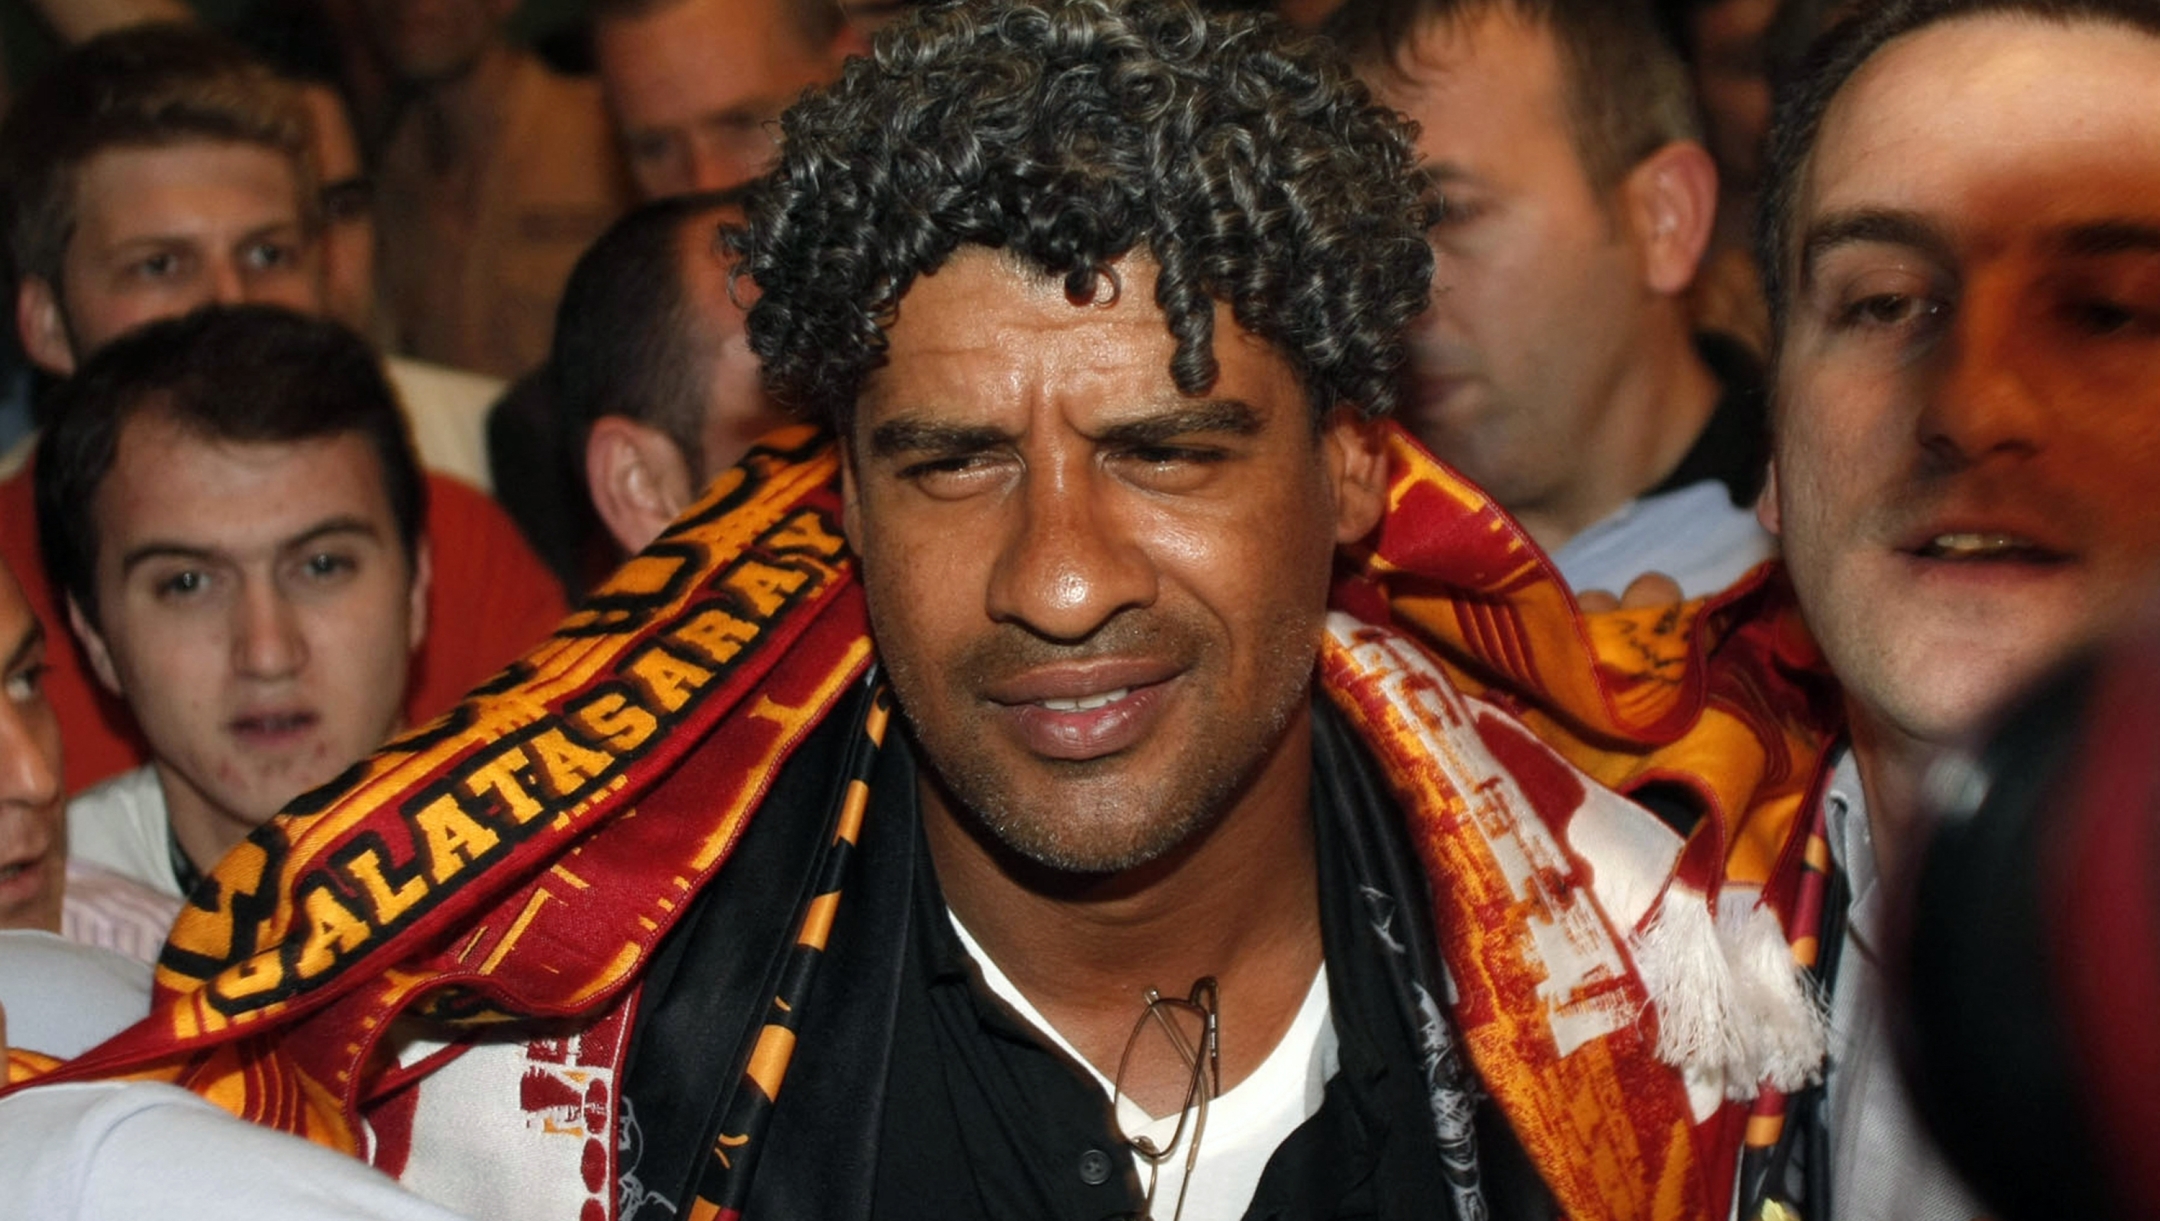 Dutch soccer coach Frank Rijkaard (C) is welcomed by Galatasaray soccer fans upon his arrival at Ataturk airport in Istanbul on June 5, 2009. Rijkaard will replace Bulent Korkmaz as coach at Galatasaray, the Turkish club said on Friday. AFP PHOTO/STR (Photo by AFP)